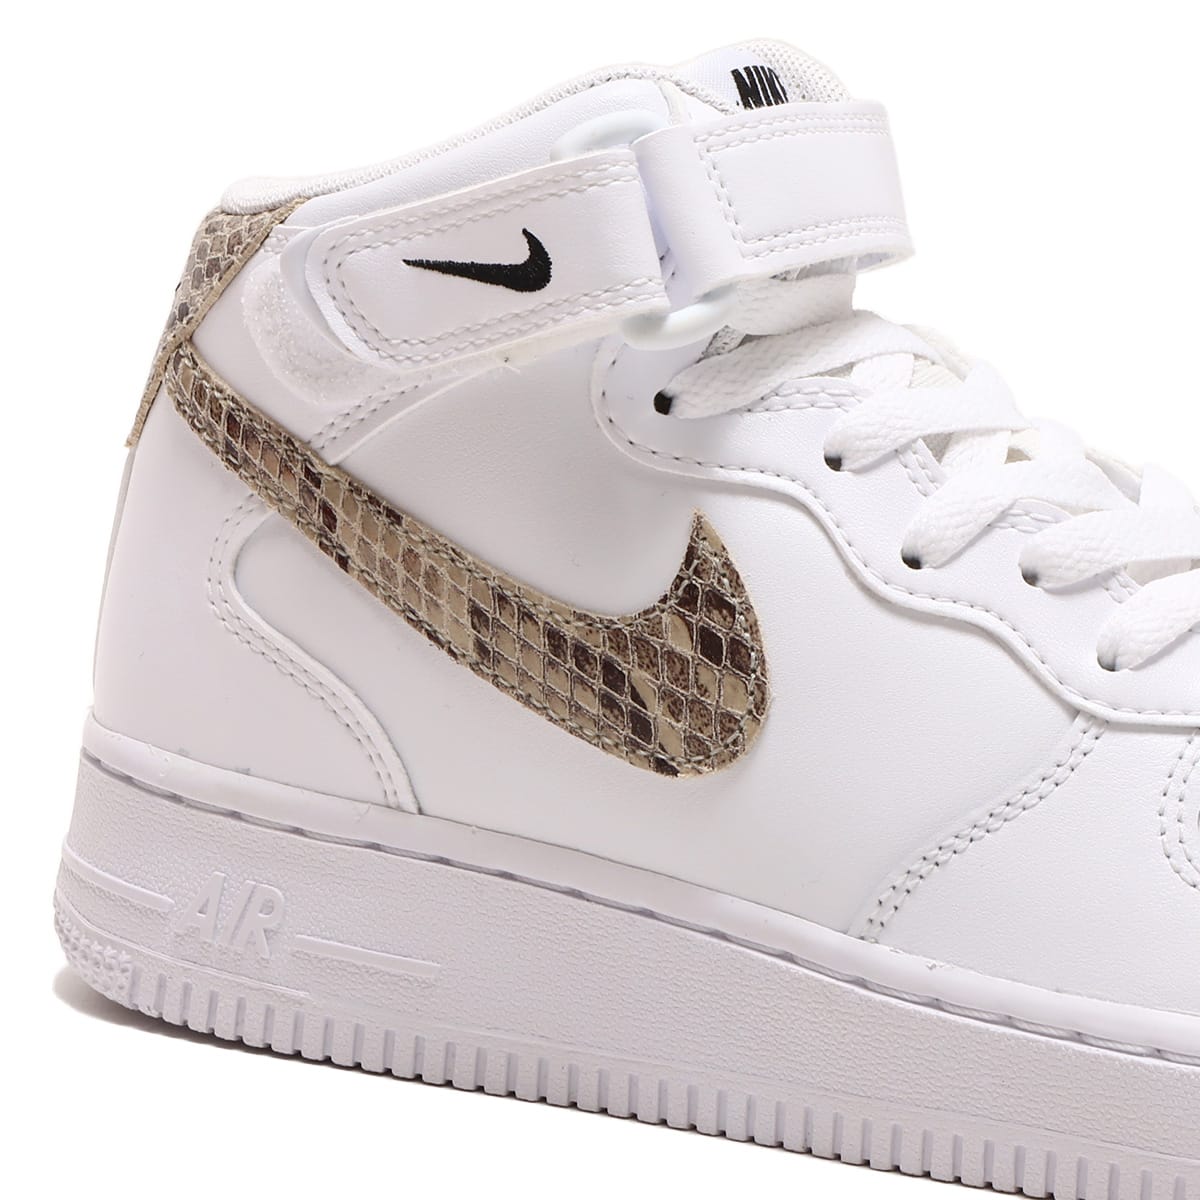 WMNS AIR FORCE 1 '07 MID SNAKE エアフォース1